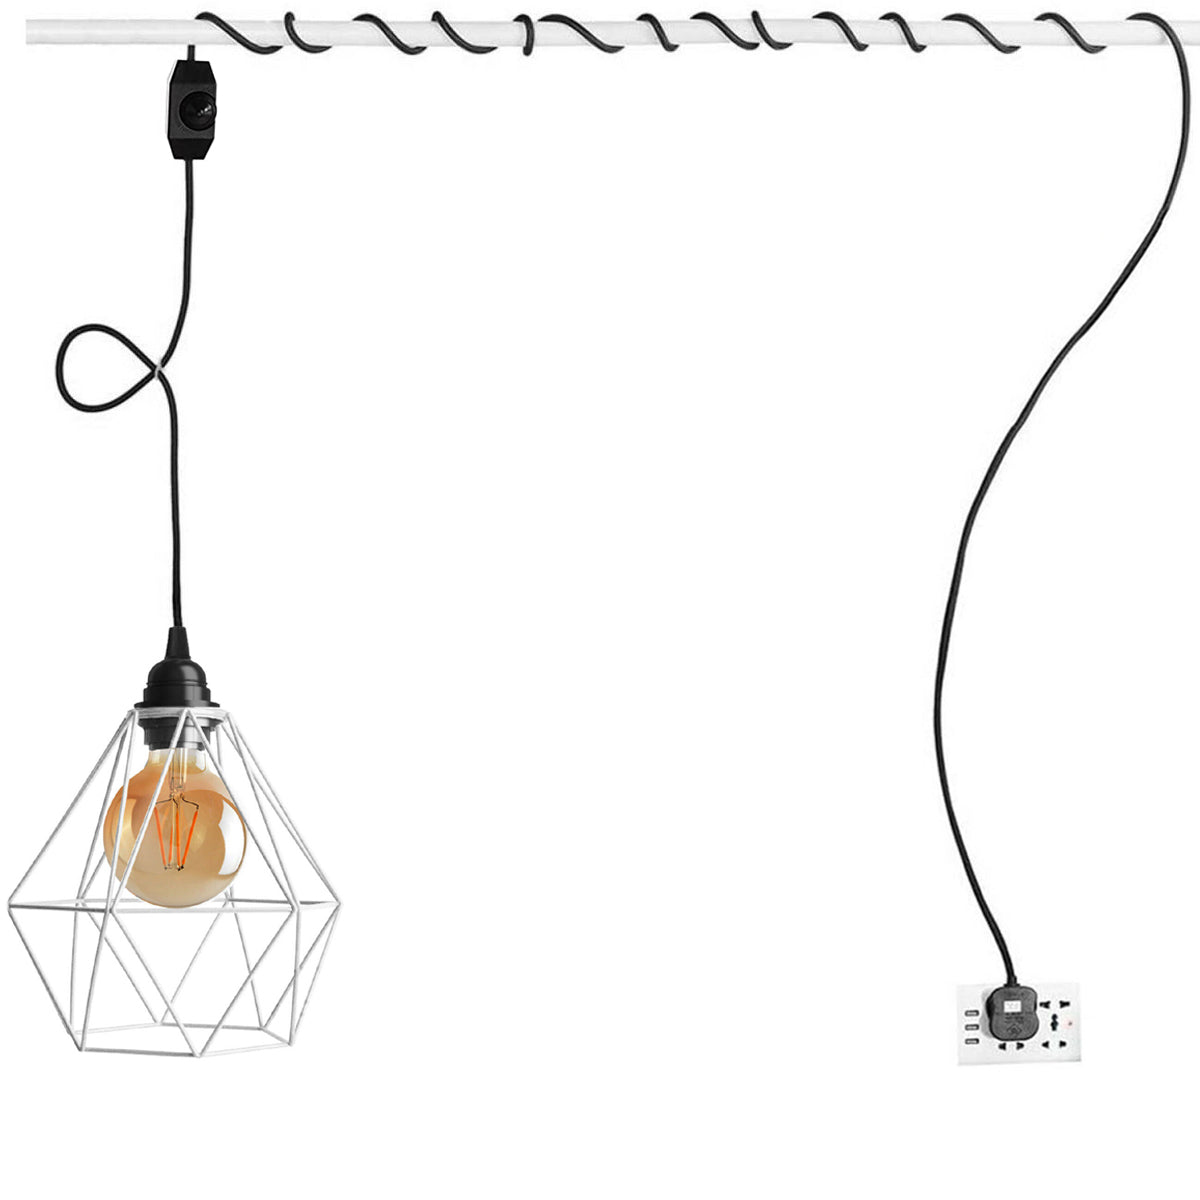 Plug In Pendant With Dimmer Switch 4m Fabric Cable Diamond Cage Lighting Kit~1862 - LEDSone UK Ltd